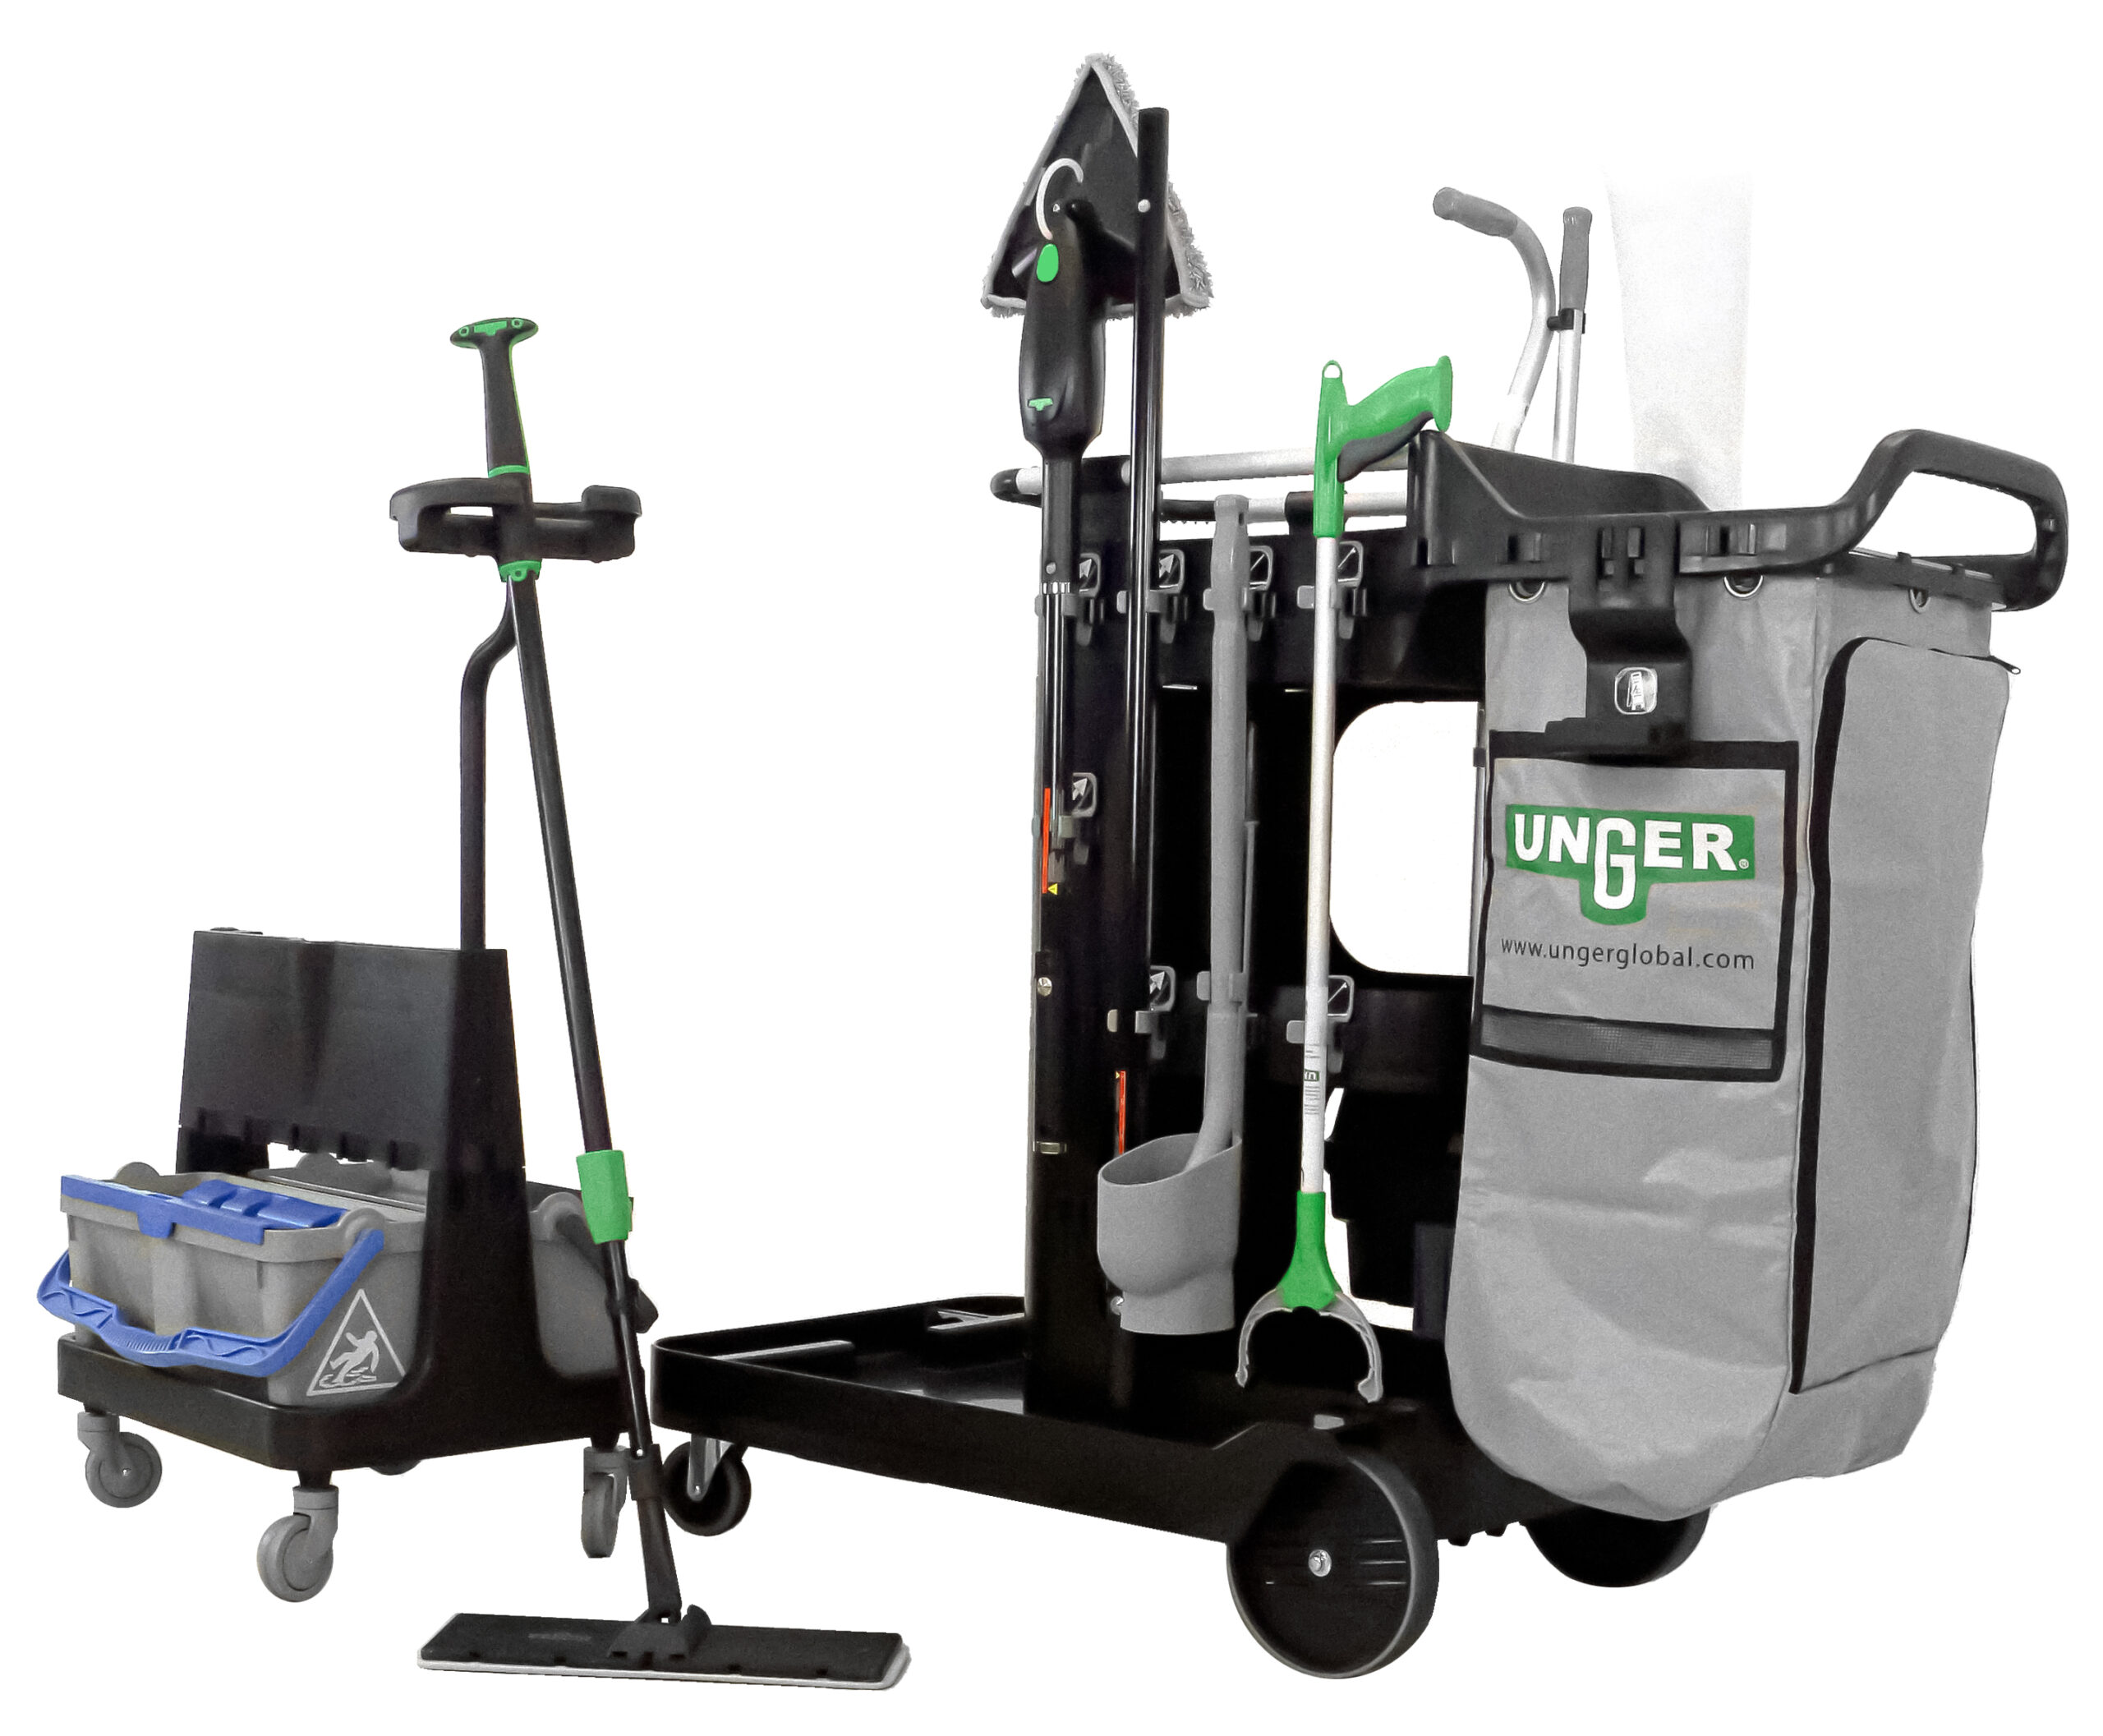 Unger DeepCleanRX Janitorial Cart System